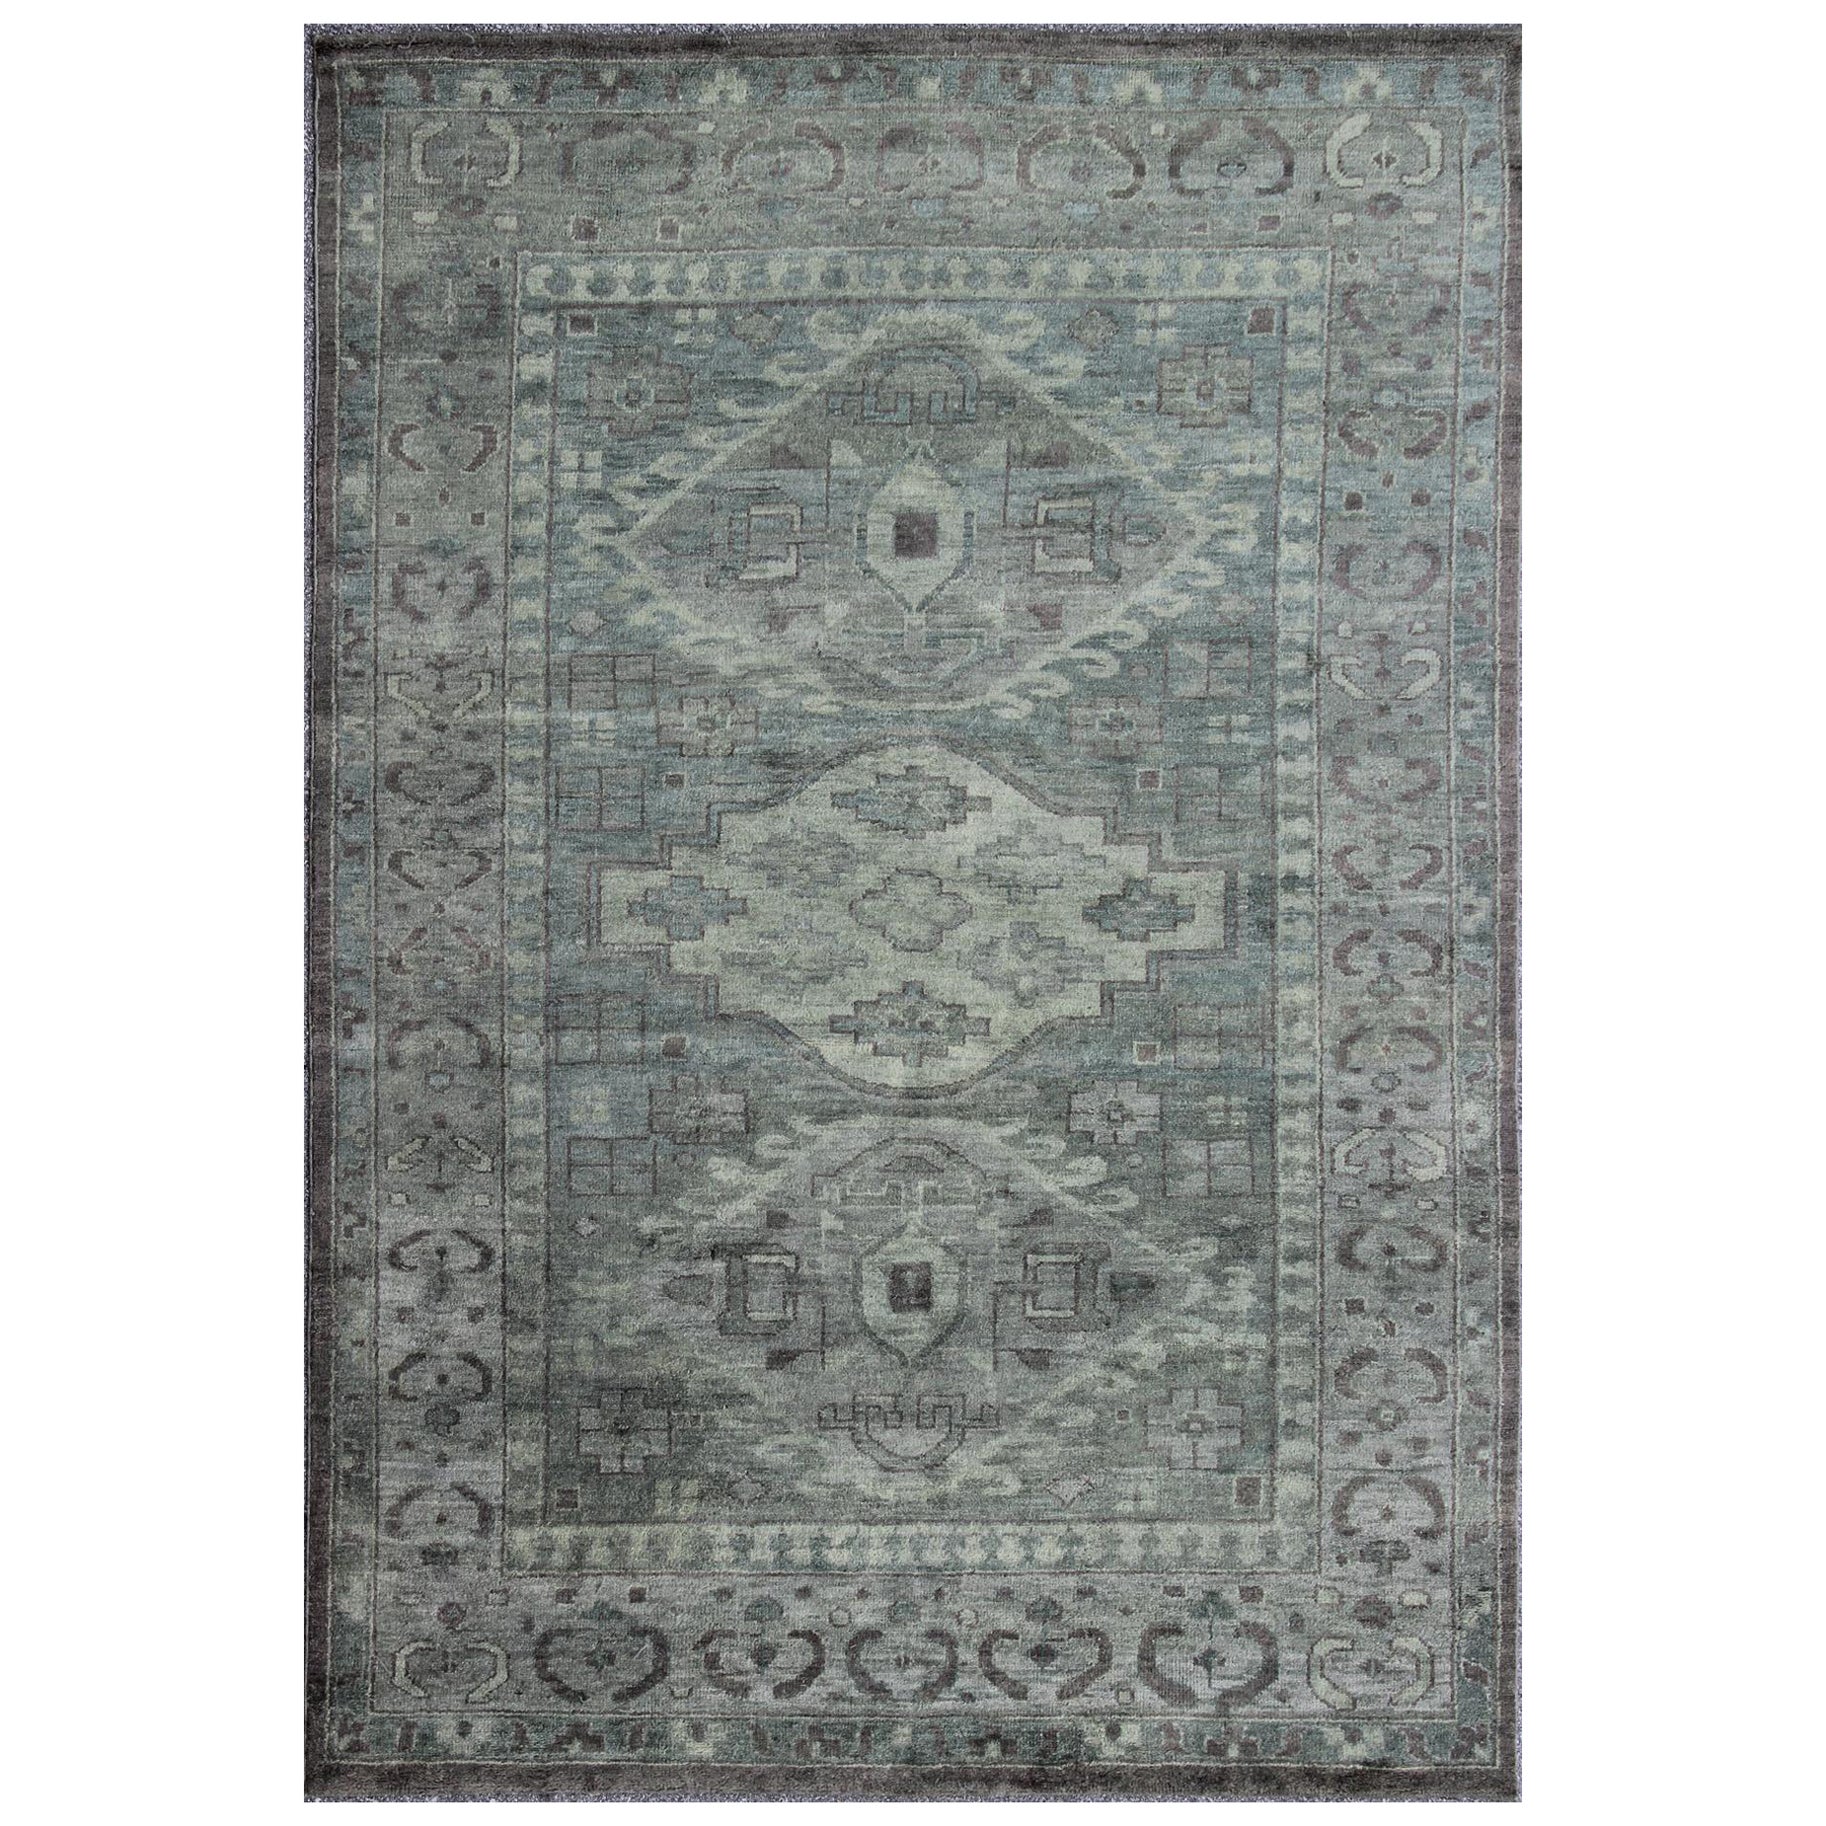 Modern Khotan Rug with Geometric Design in Various Shades of Green and Brown